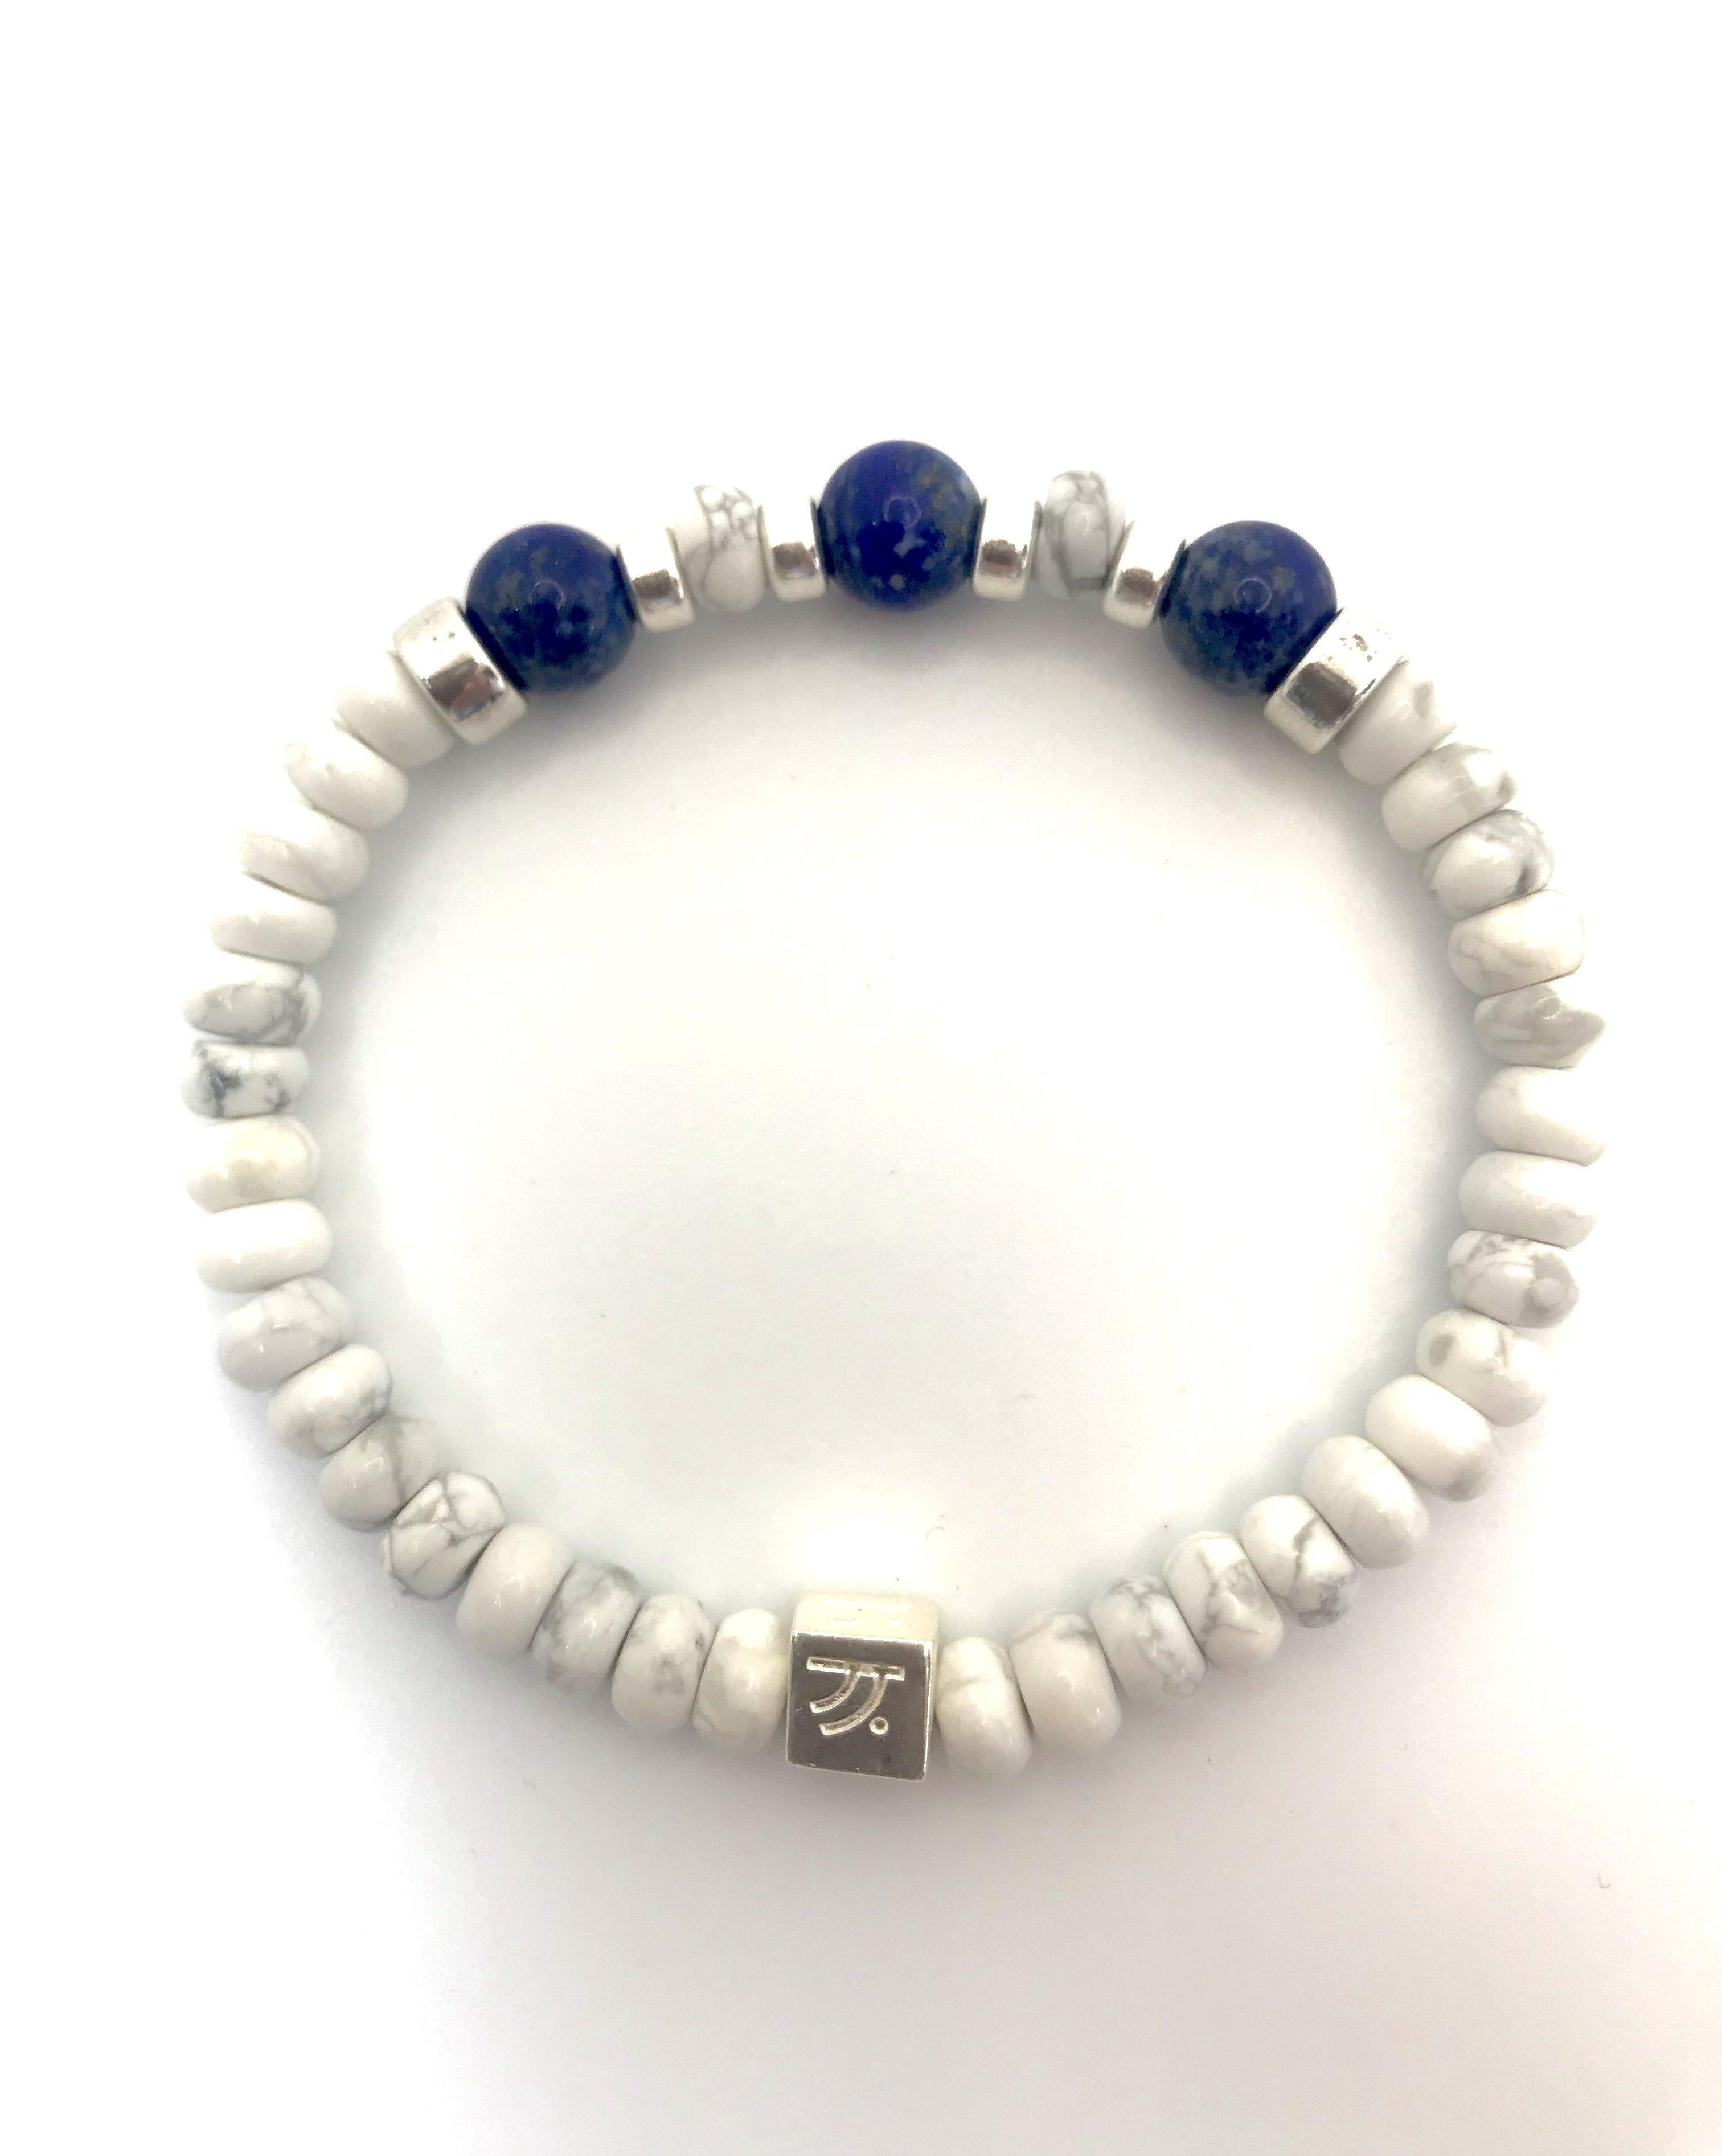 Behind the Jewelry
For those bleeding Dodger blue, we have the perfect bracelet to celebrate a team that continues to make it to the World Series and has a chance to bring the trophy home this year.
It is comprised of rich blue lapis and white